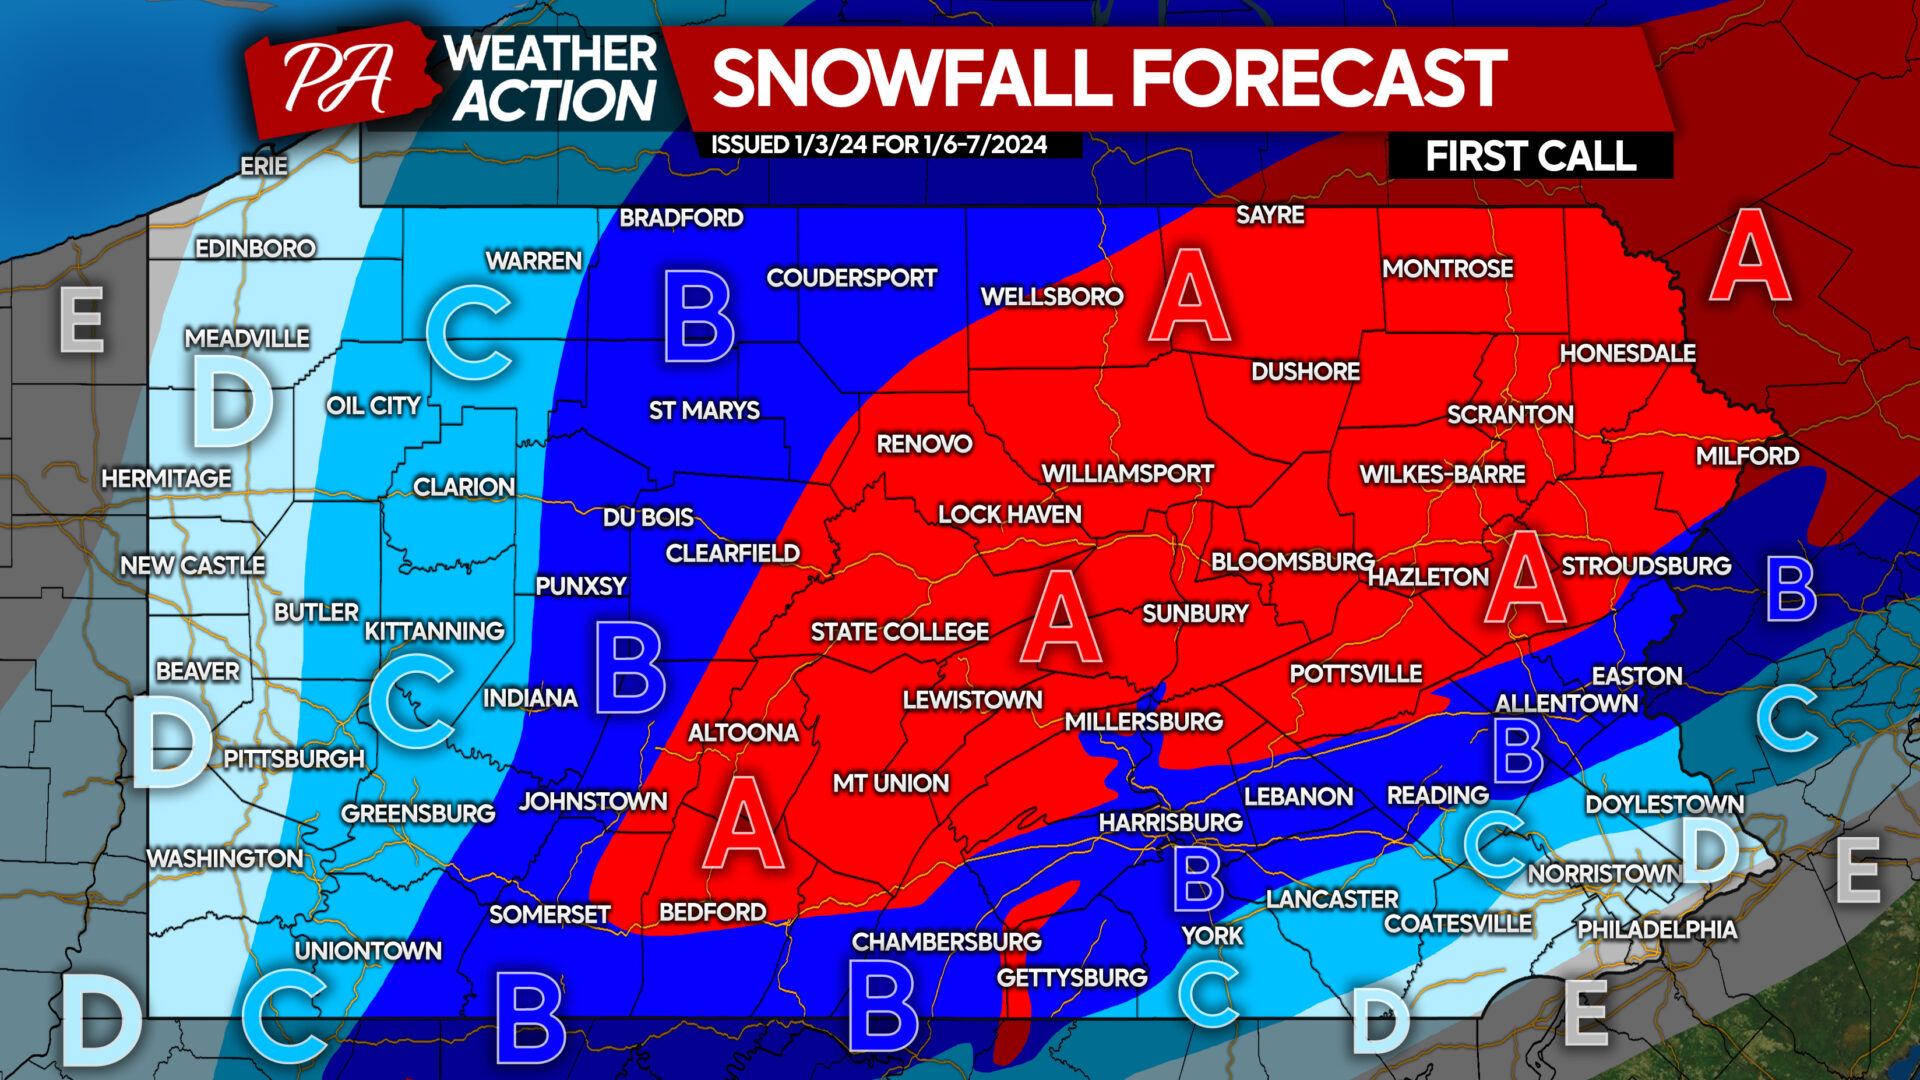 First Call Snowfall Forecast for Significant Winter Storm Expected this Weekend